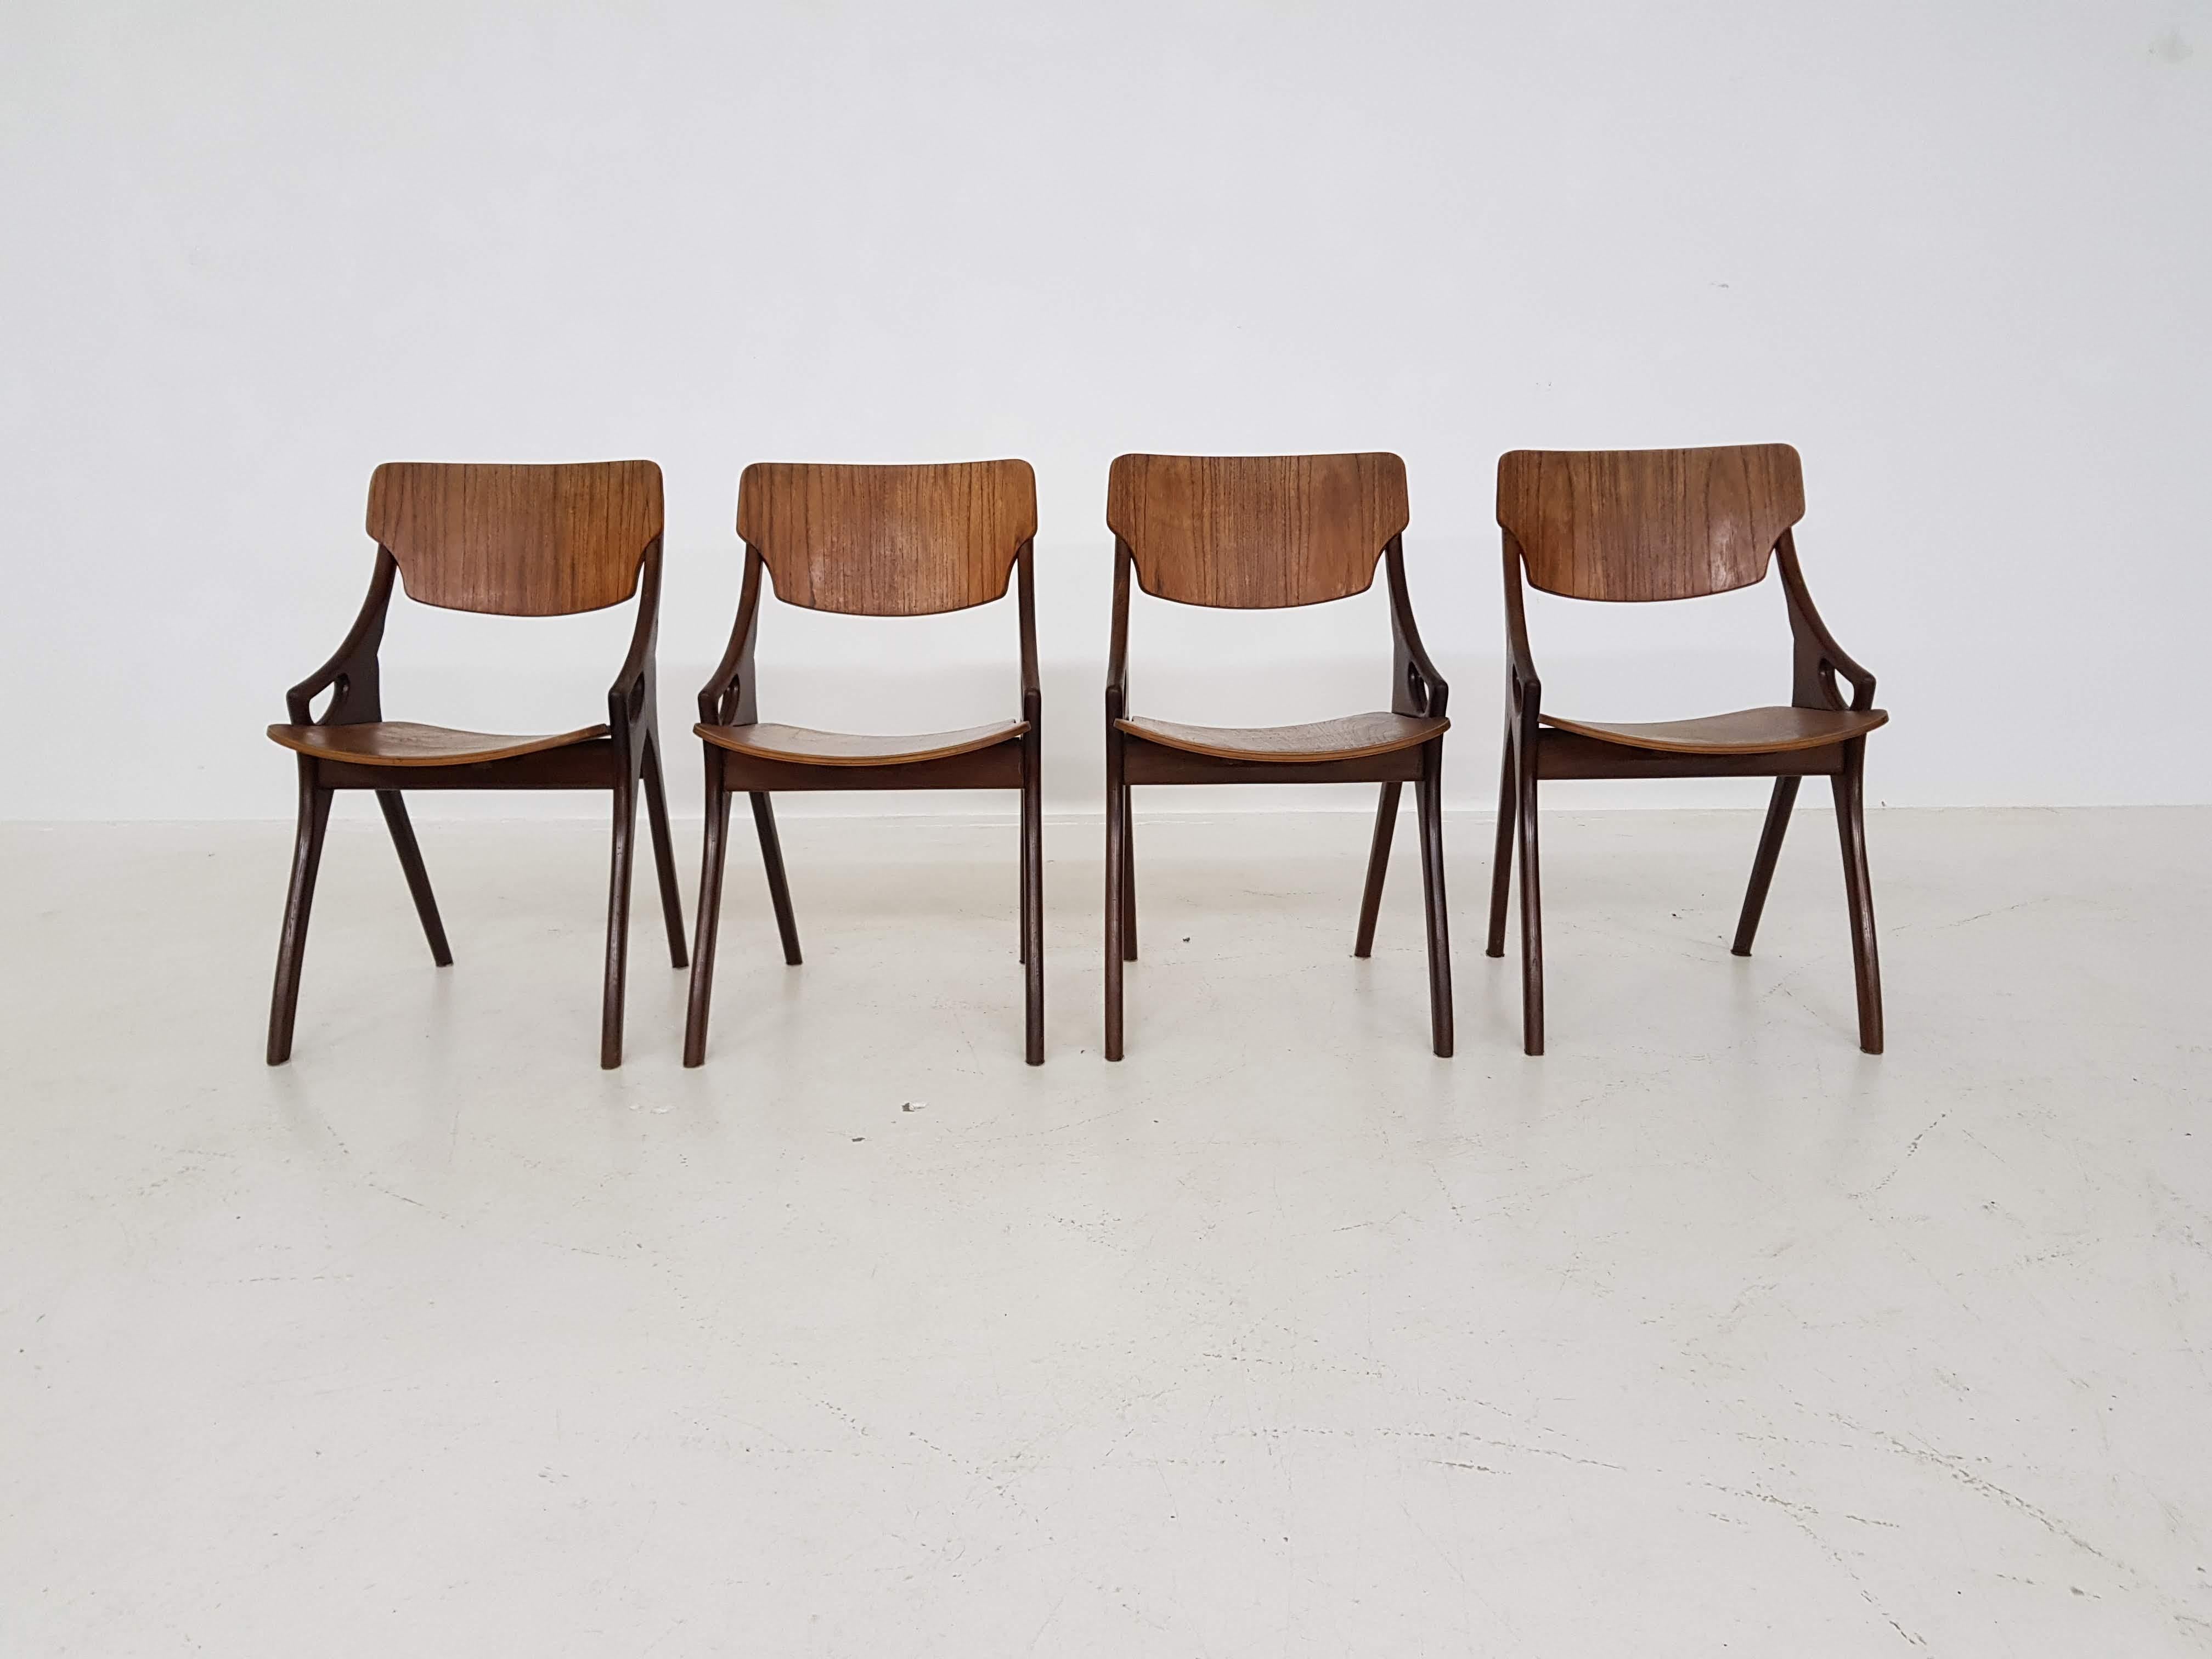 The famous Danish teak dining chairs with their iconic handgrips. Beautifully crafted by Mogens Kold and a design from Arne Hovmand Olsen.

One chair has a repair to the back, and they all have some traces of use.

Measures: Width 50 cm; seating